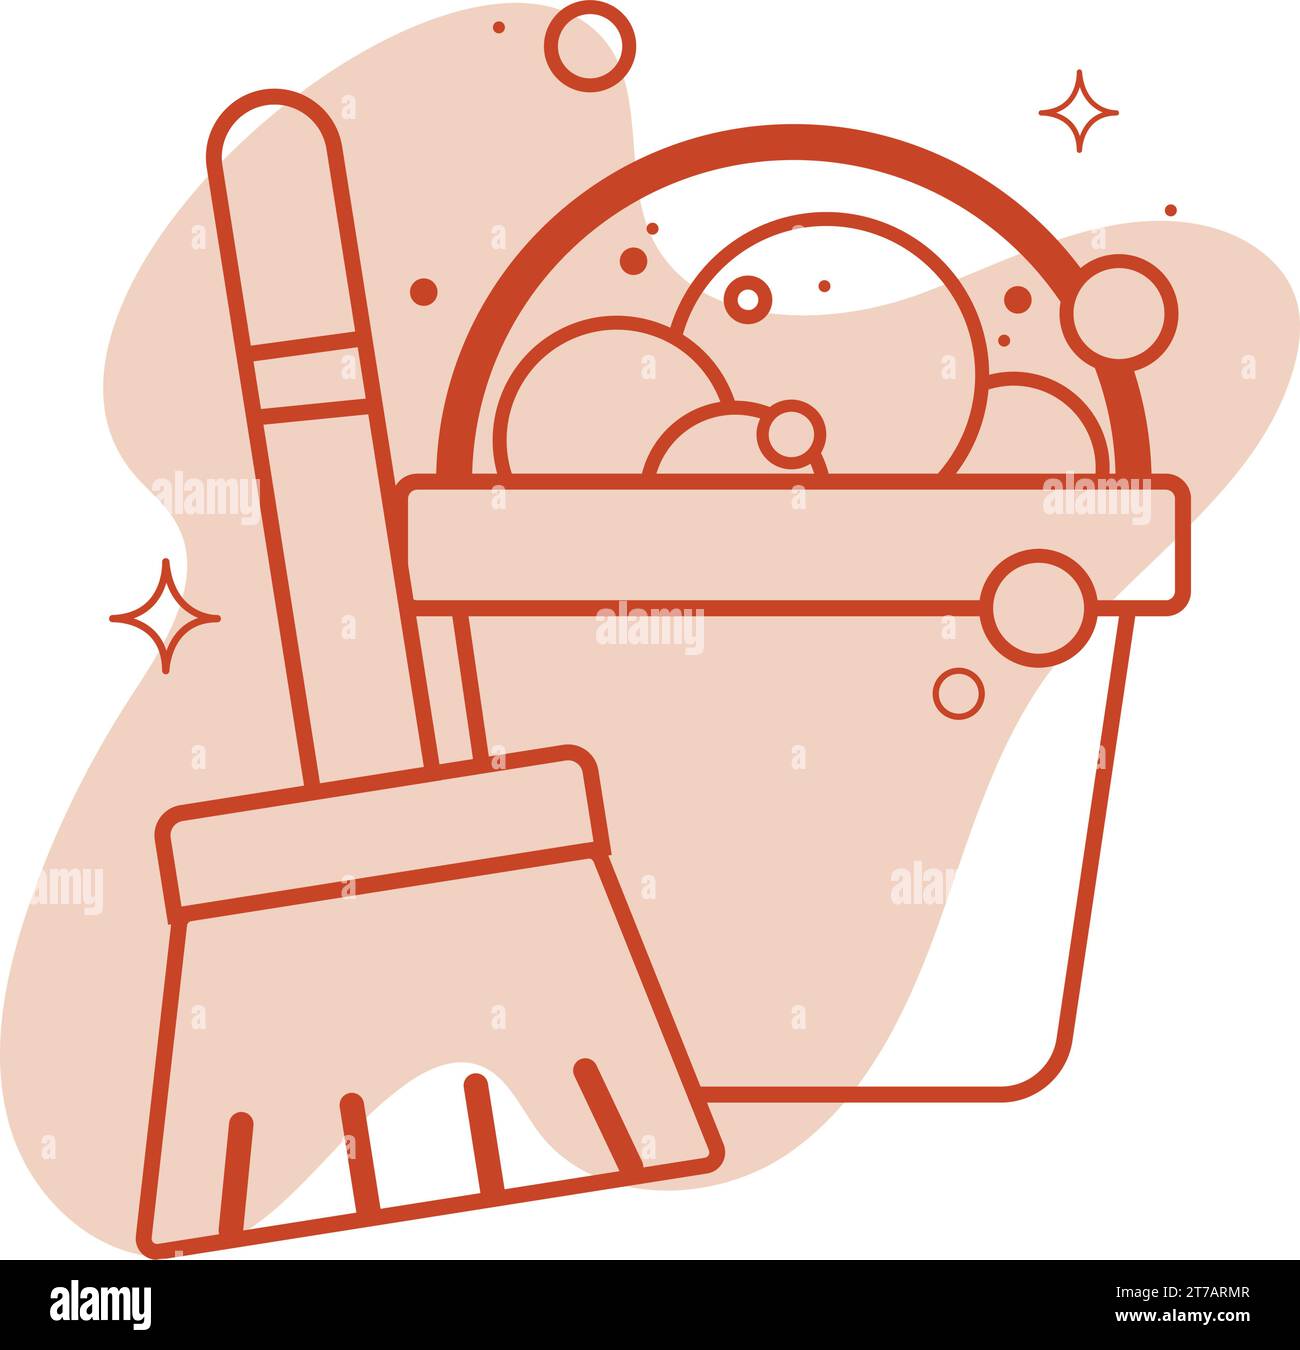 Isolated wooden broom and bucket with bubbles icon Vector Stock Vector